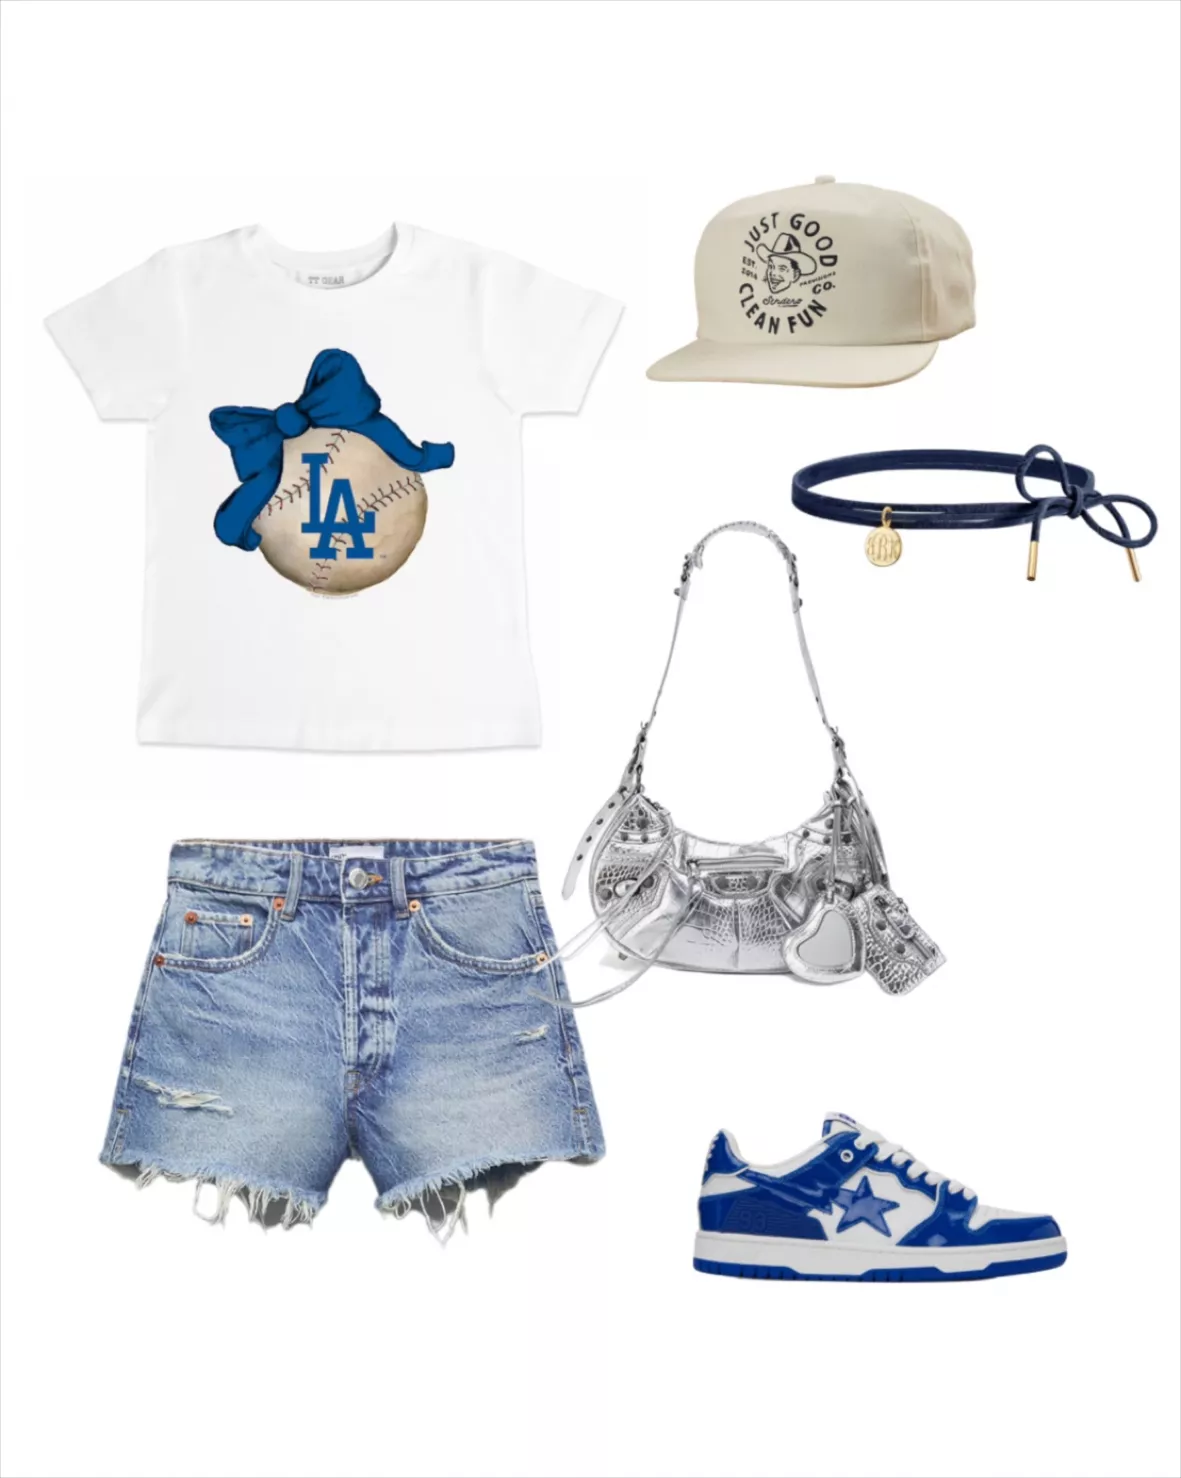 dodger game outfits